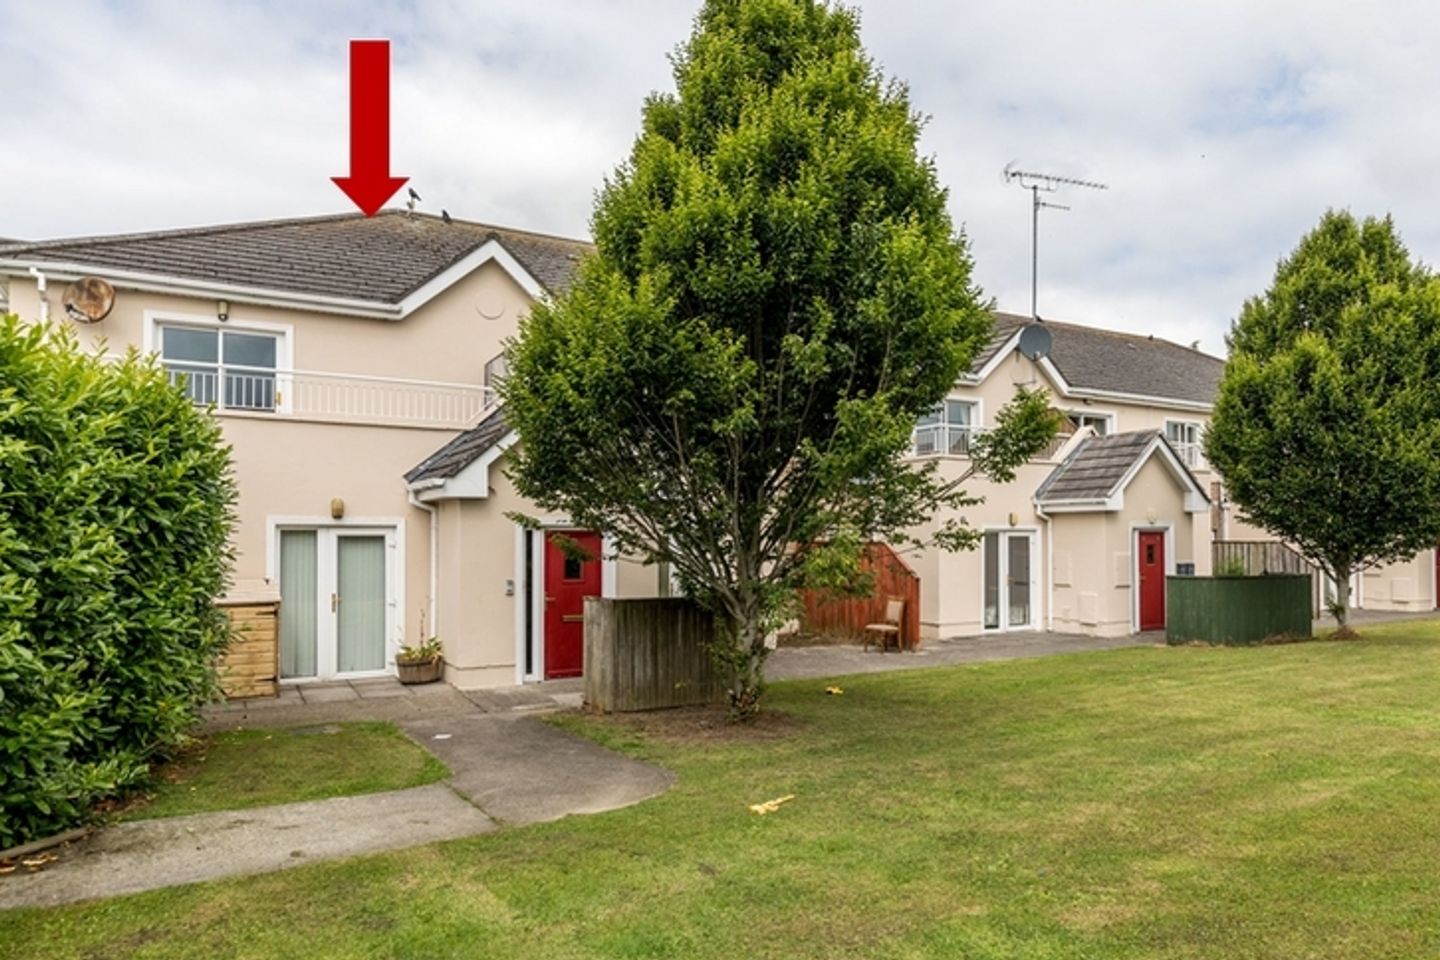 12 The Pines, Fairyhouse Road, Ratoath, Co. Meath